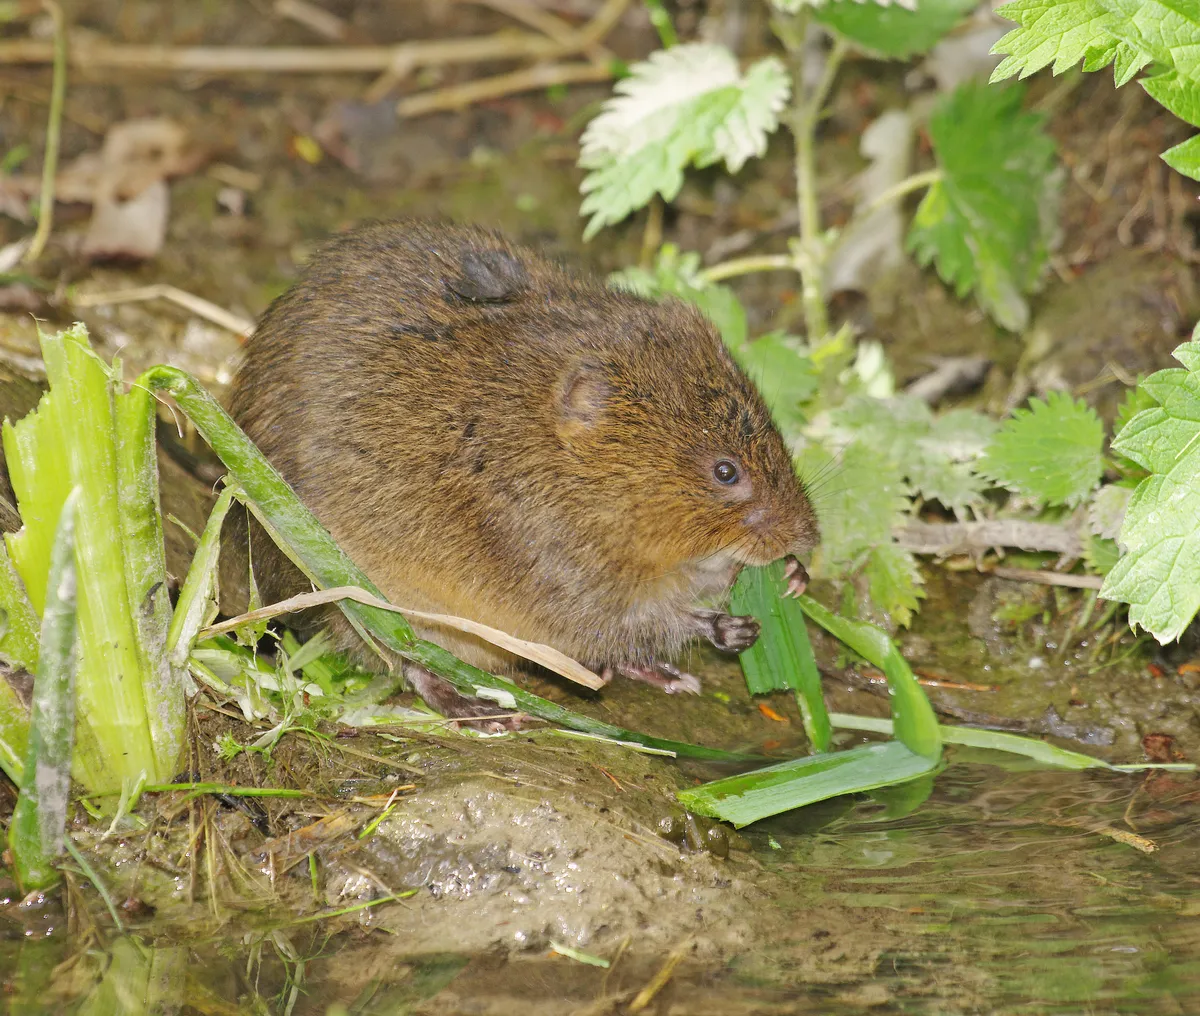 A water vole feeding on the edge of a stream in Swindon, Wiltshire, England, UK. © Gary Chalker/Getty